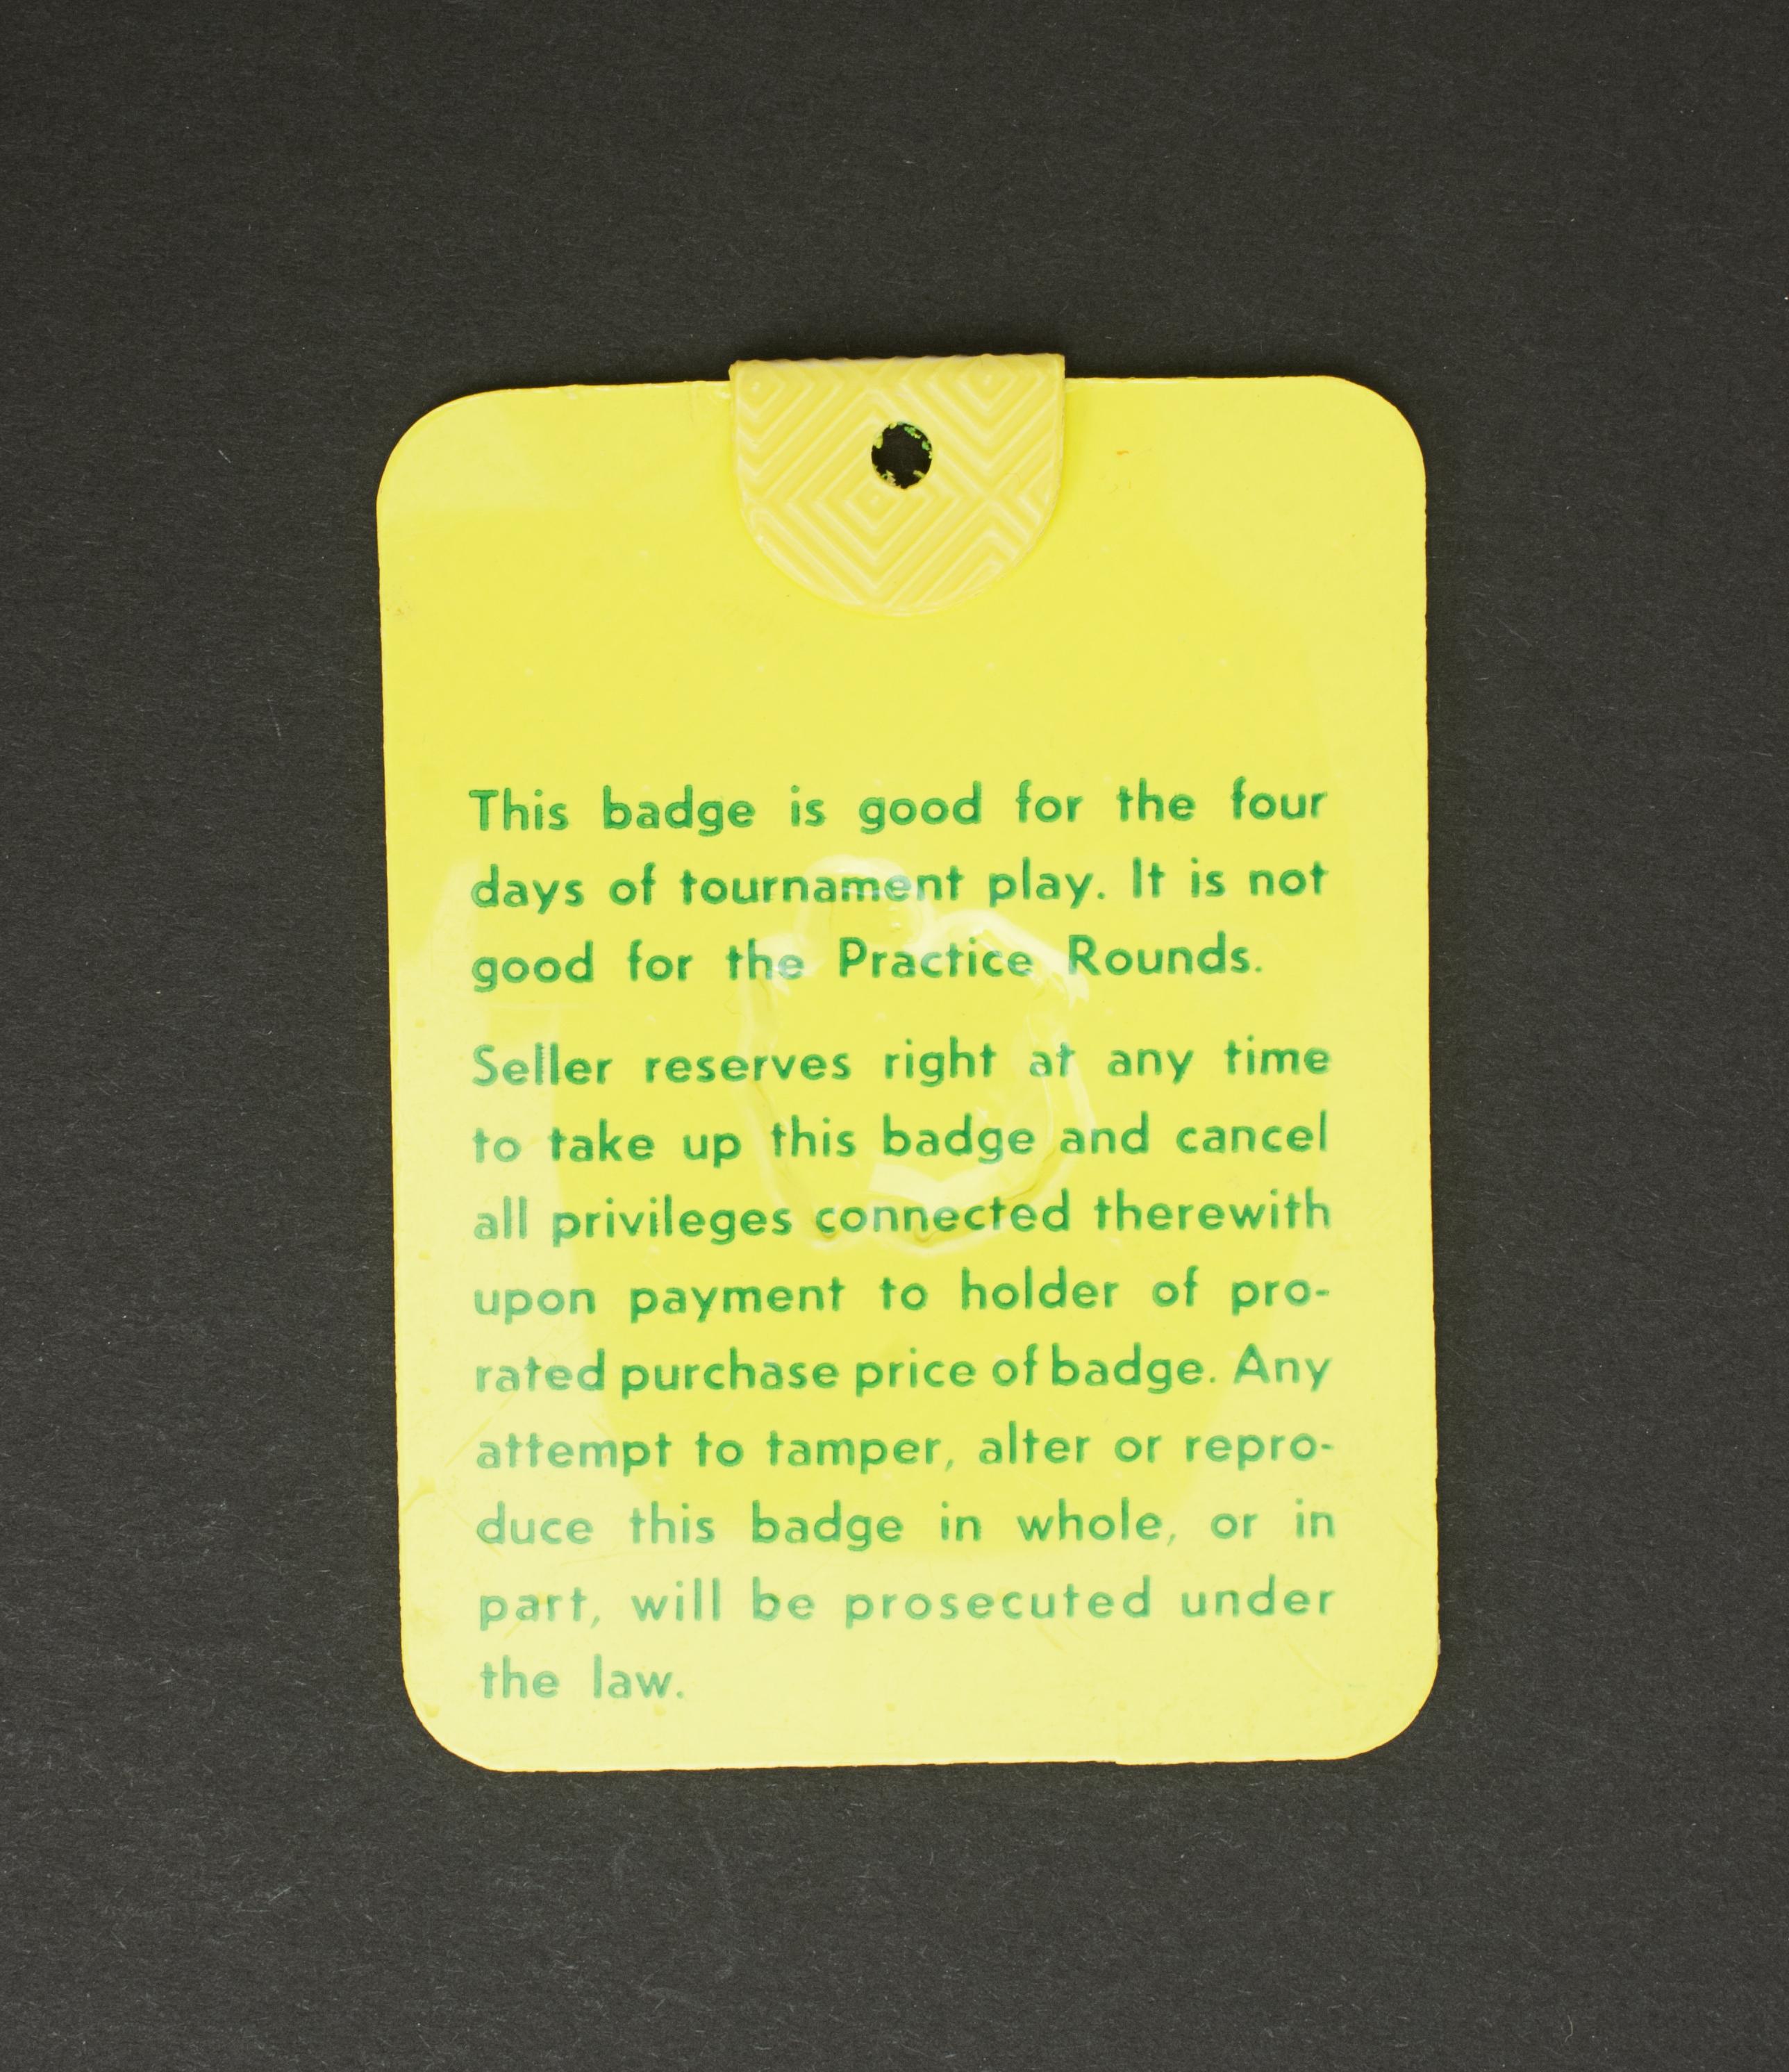 Augusta National Golf Club, US Masters 1988 Tournament Badge.
A pre-owned 1988 US Masters Golf Tournament spectators badge. The eventual winner being Sandy Lyle of Scotland with a birdie on the 18th to finish on 7 under par. He became the first